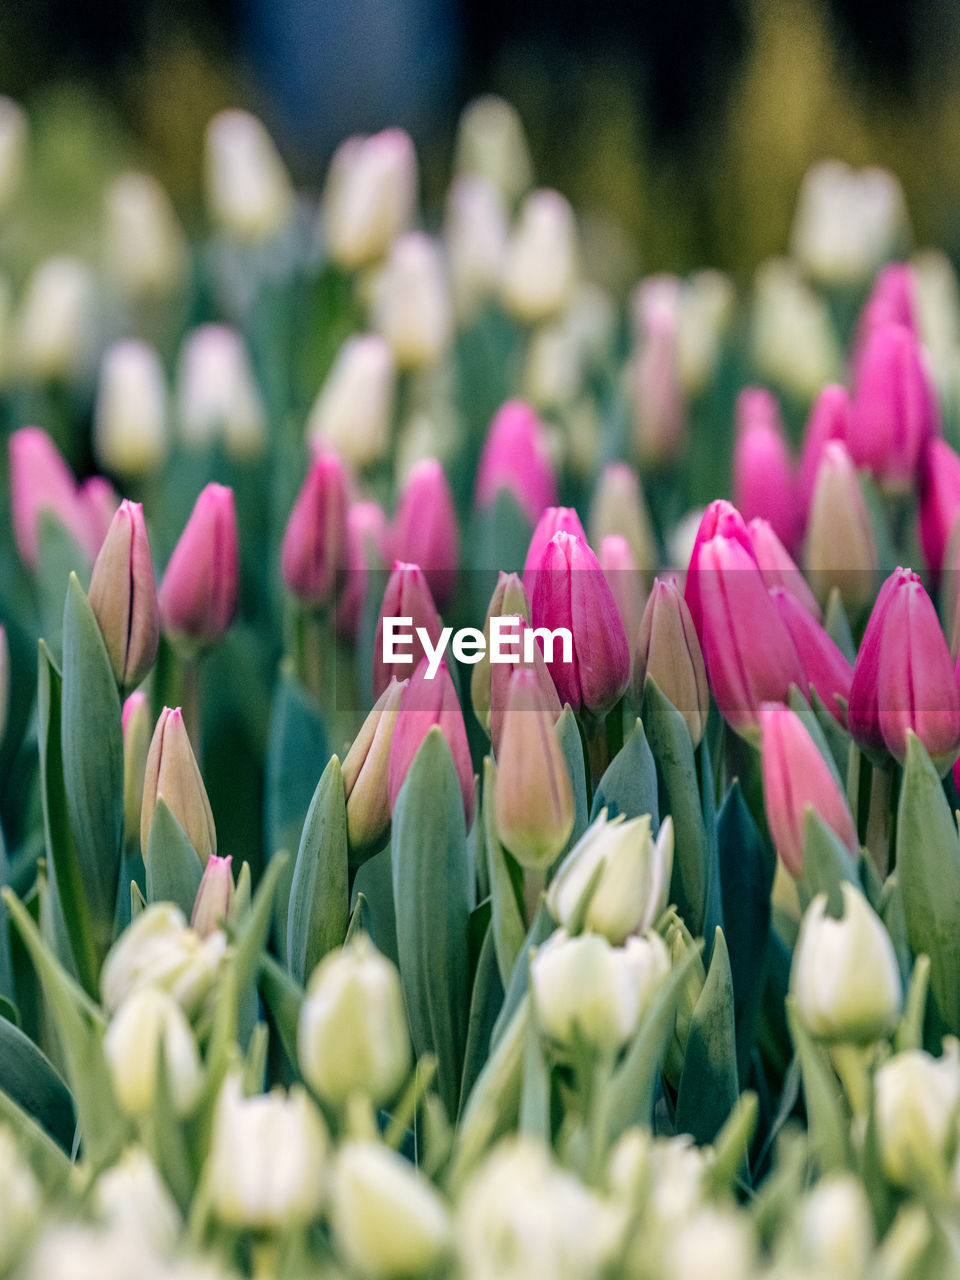 flower, flowering plant, plant, freshness, beauty in nature, tulip, selective focus, nature, close-up, pink, no people, fragility, petal, springtime, flower head, growth, spring, flowerbed, inflorescence, outdoors, green, business finance and industry, macro photography, blossom, day, purple